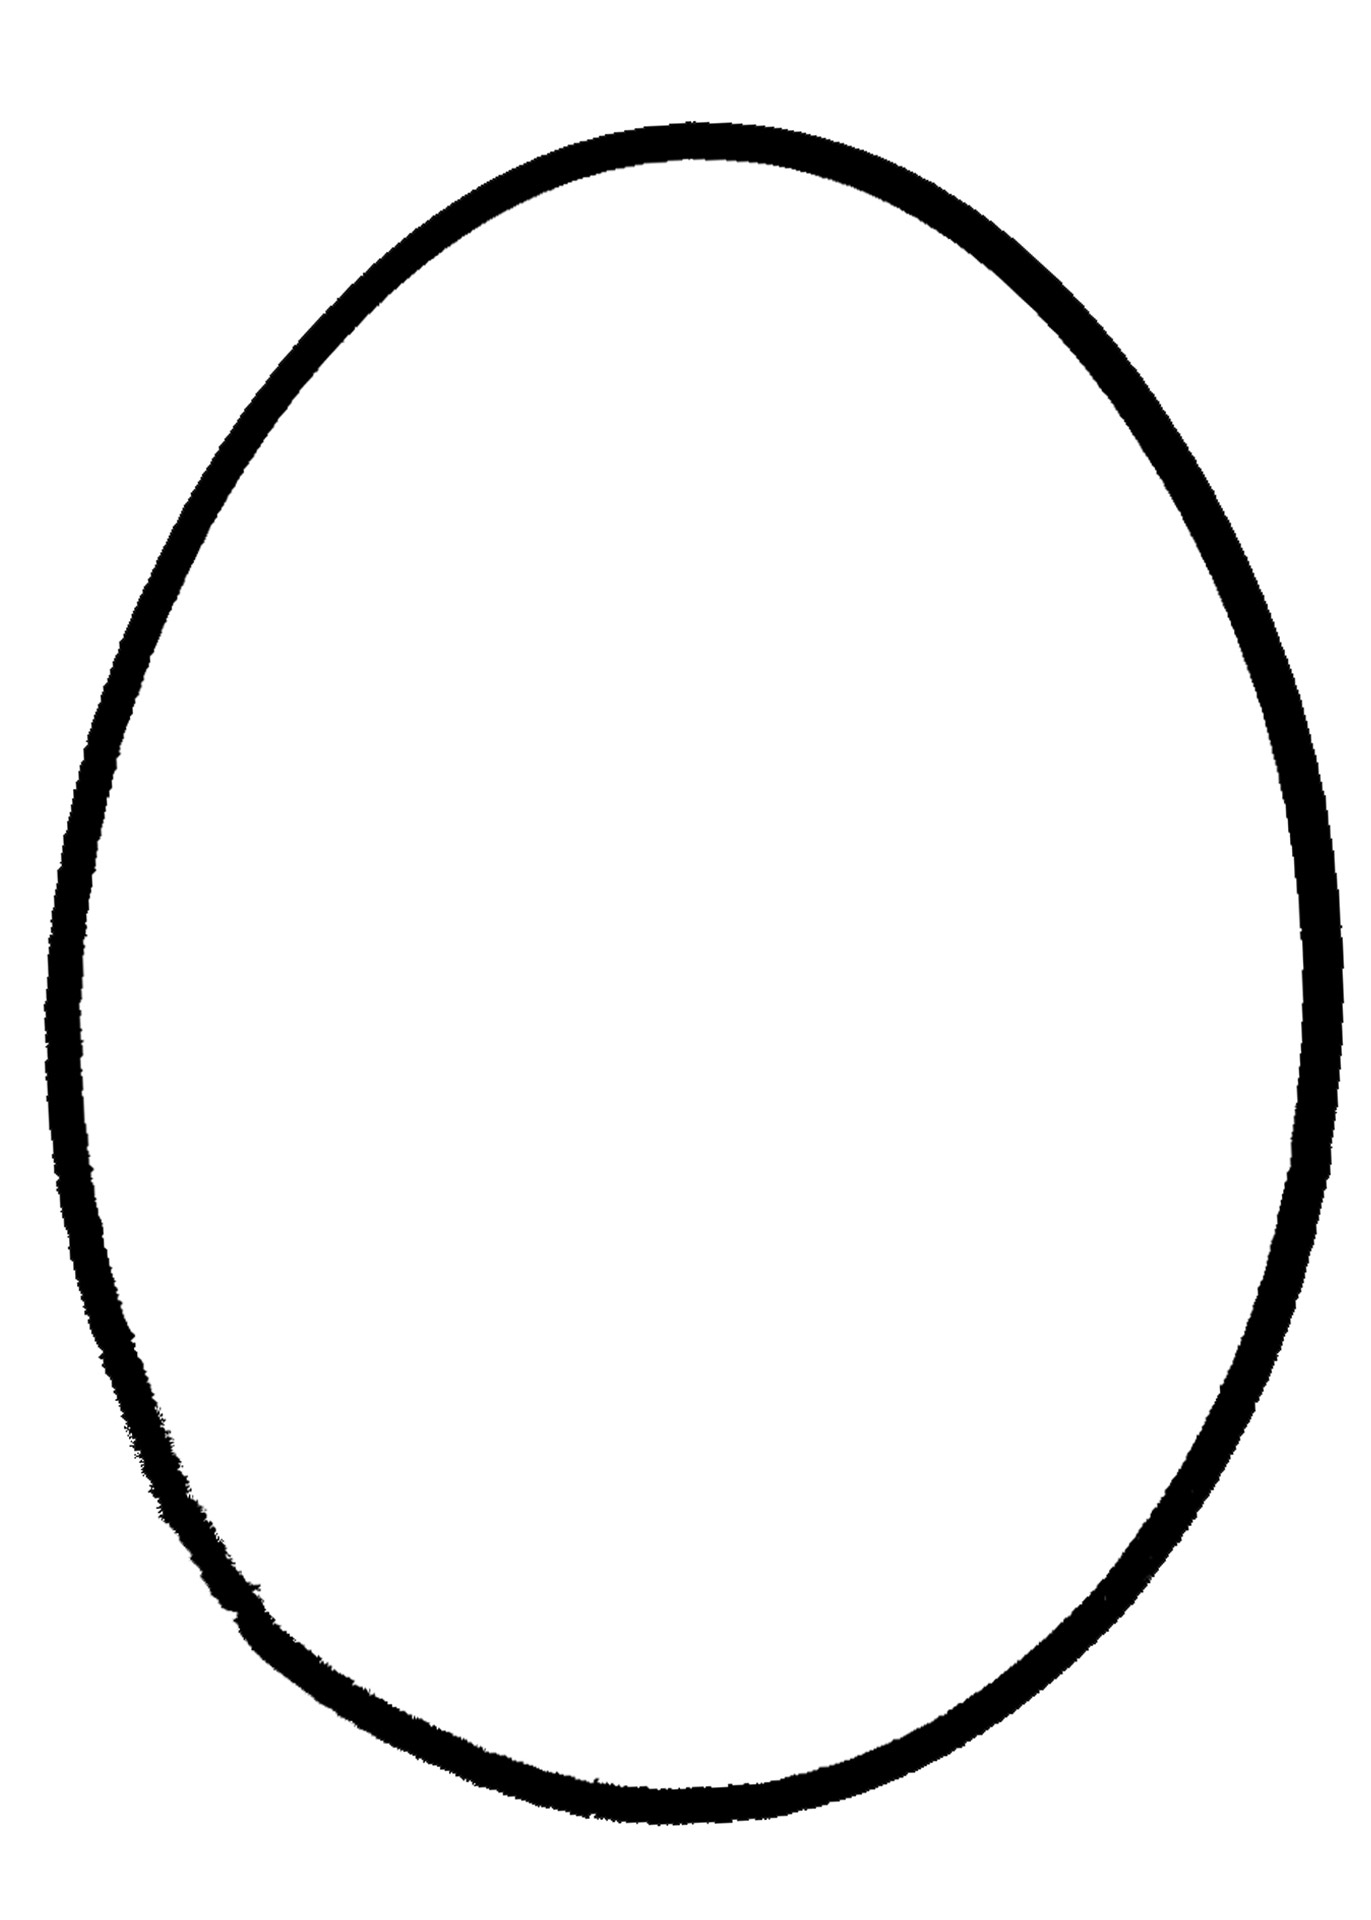 Basic Egg Outline Free Stock Photo Hd   Public Domain Pictures